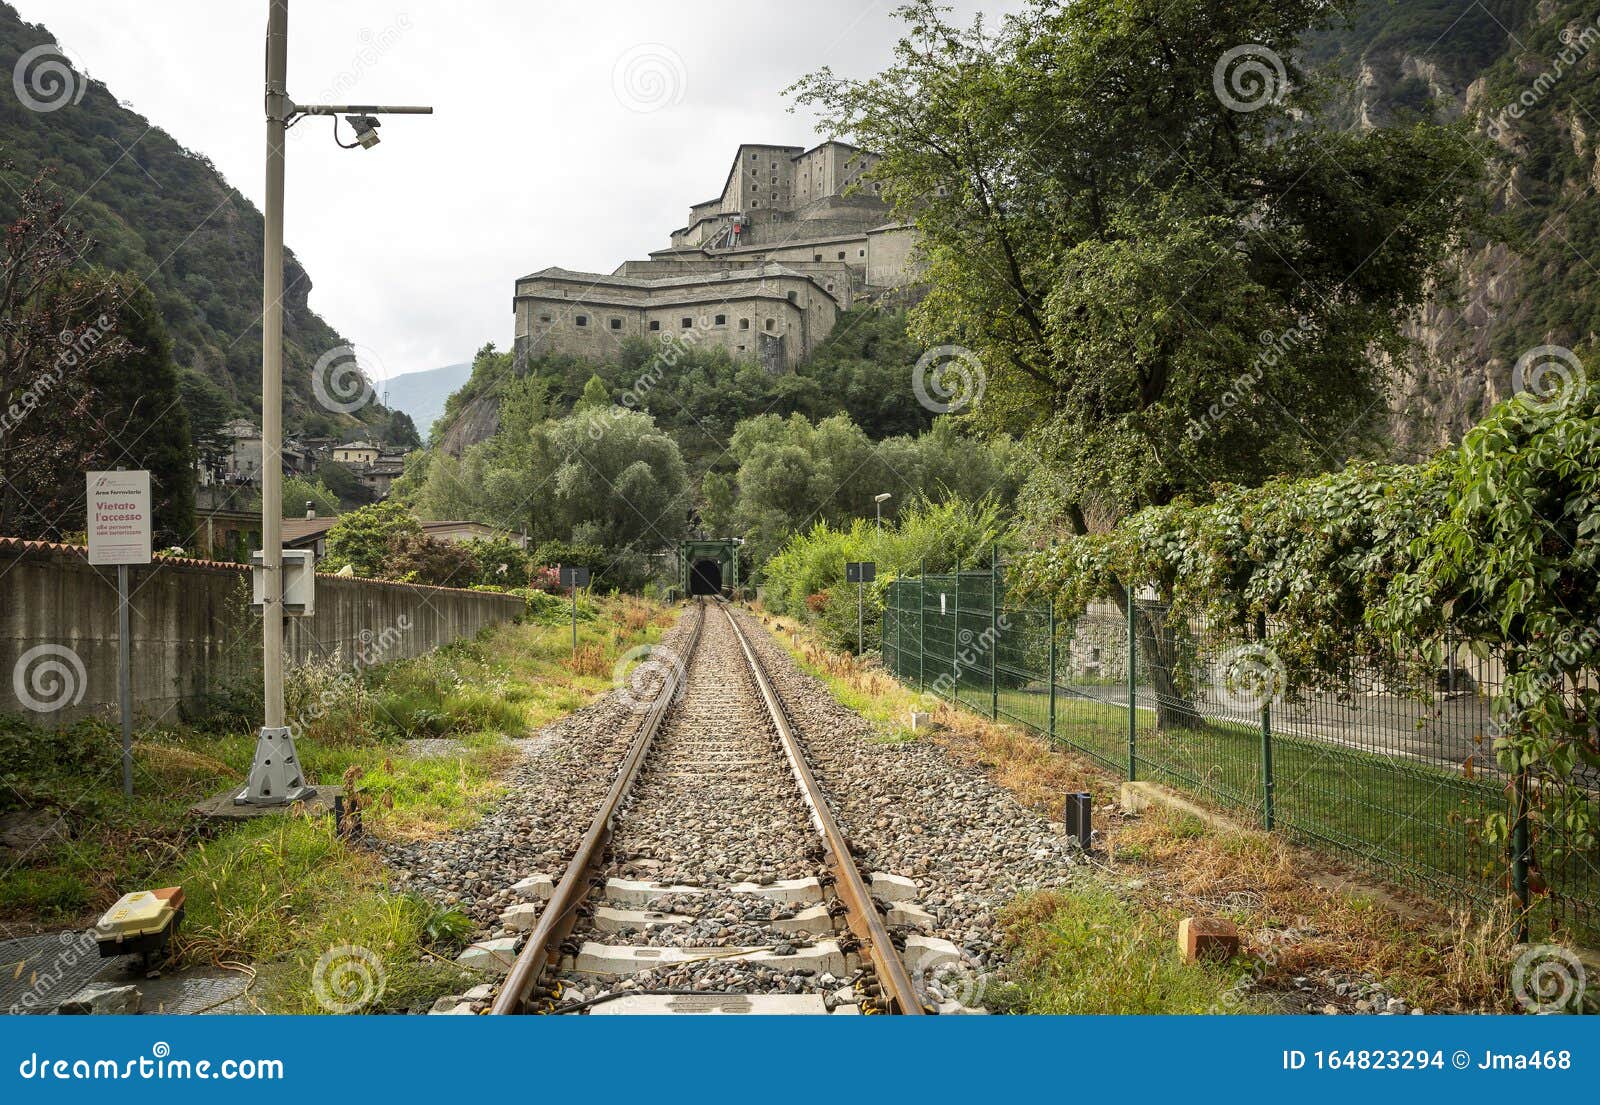 railway in hone town and a view of the bard fortress